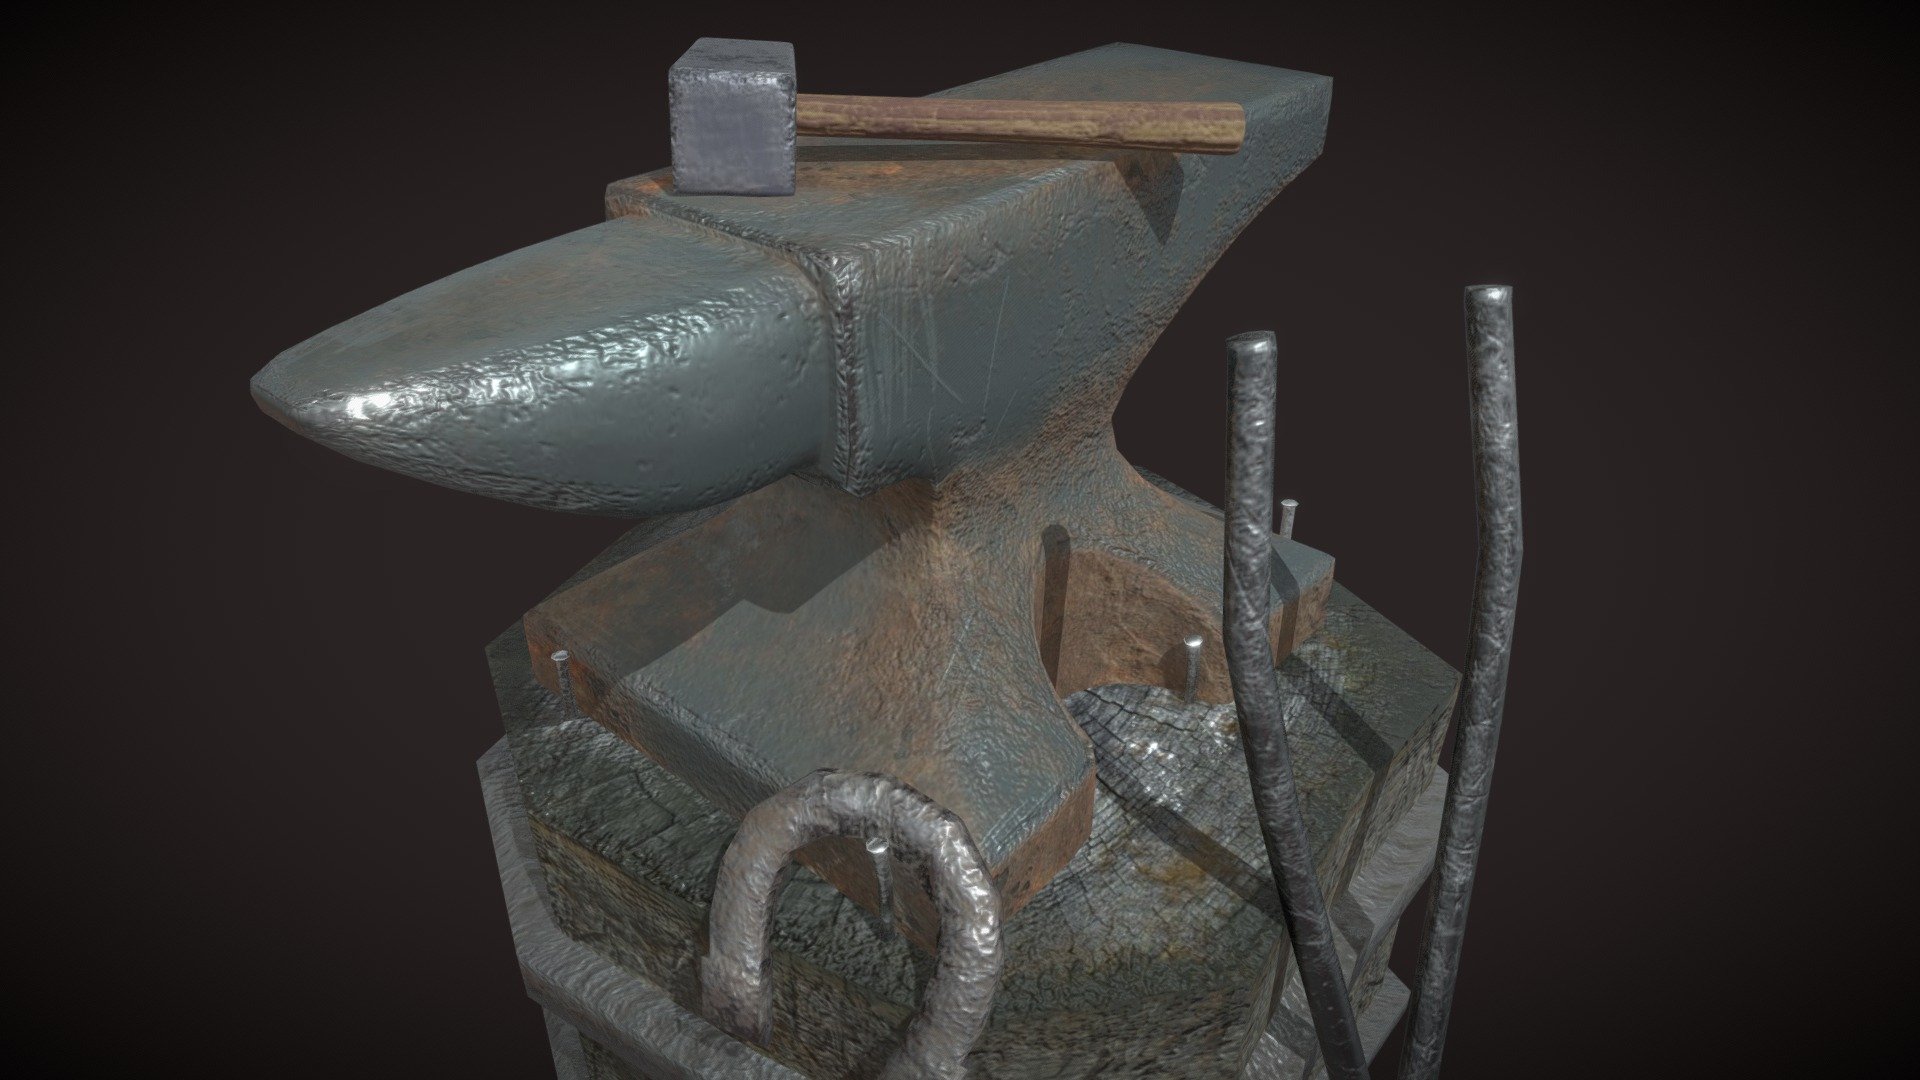 medieval anvil set piece game ready.obj format with 2k textures

blender-substance painter.if you download the model consider giving some feedback in the comments to say thanks 3d model